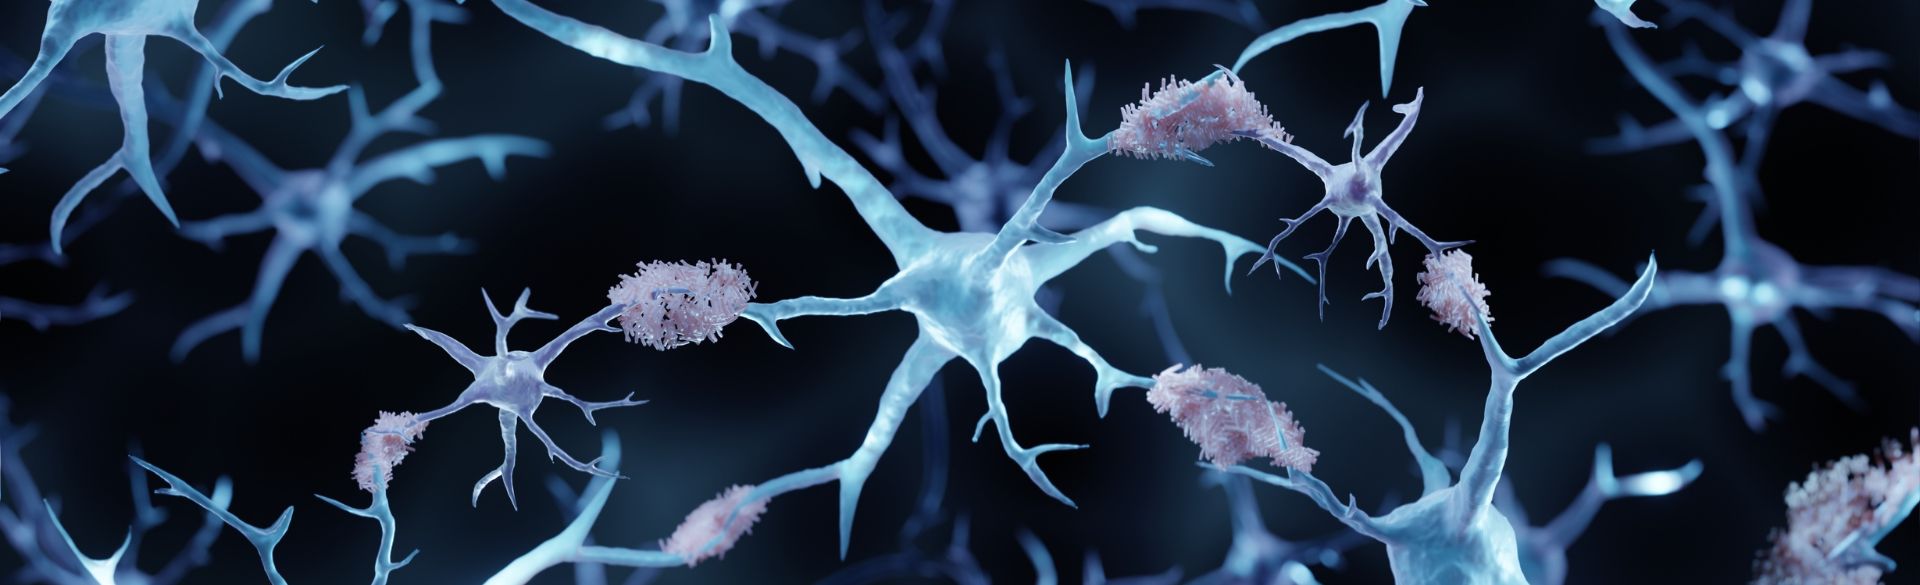 microscopic image of dendrites and amyloid plaques